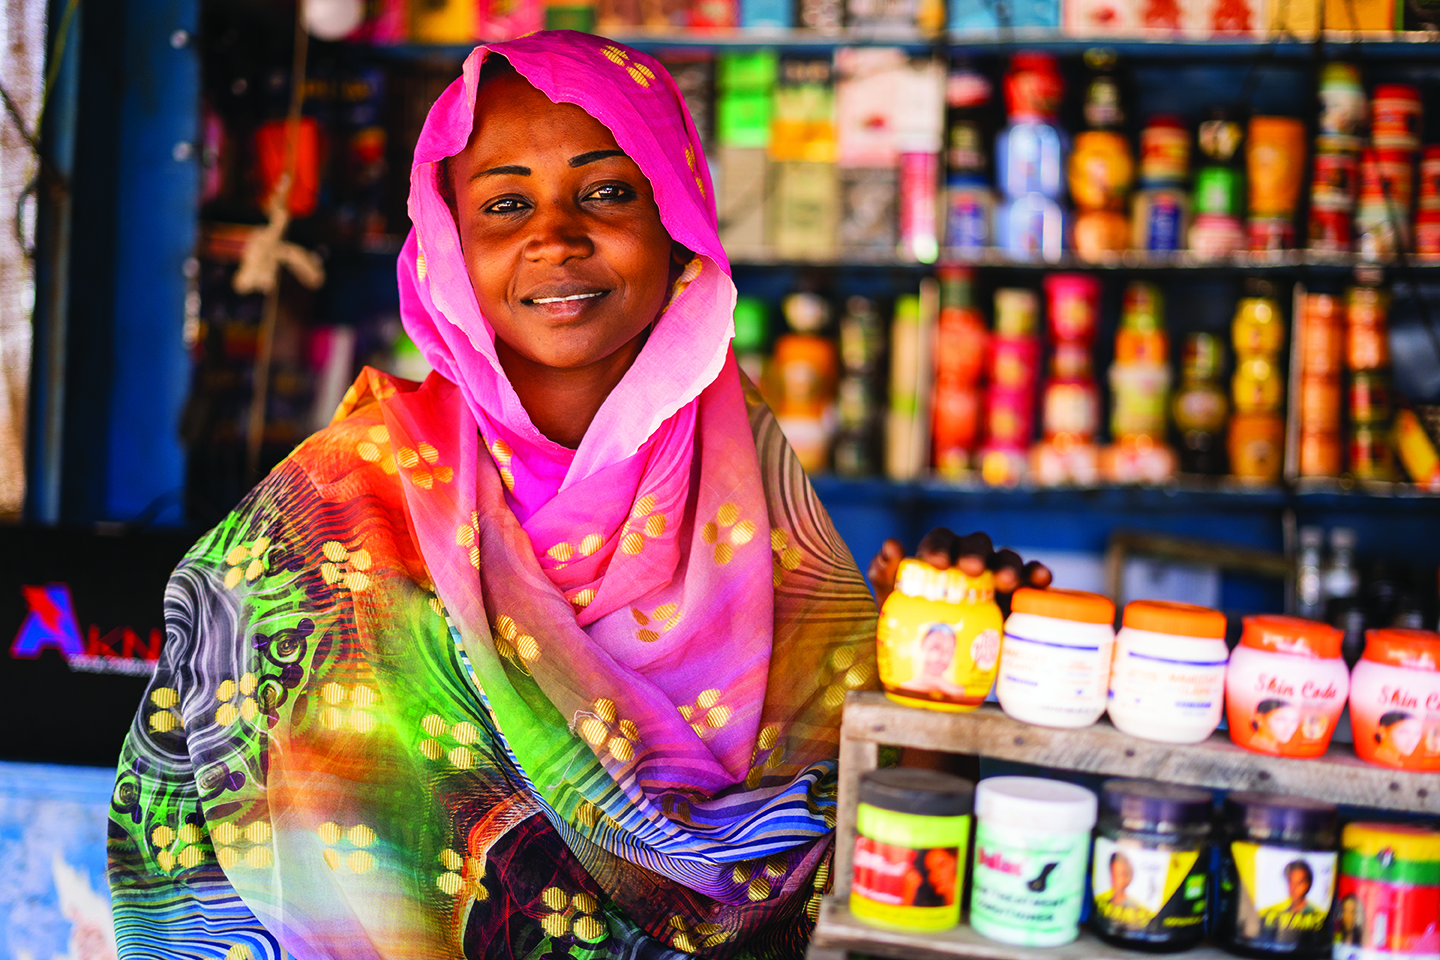 Hawa Abdalnabi is an entrepreneur fighting for change in her community in Sudan. Hawa joined CARE's Every Voice Counts (EVC) project where she received training and training and joined the Village Savings & Loans Association (VSLA). Ala kheir